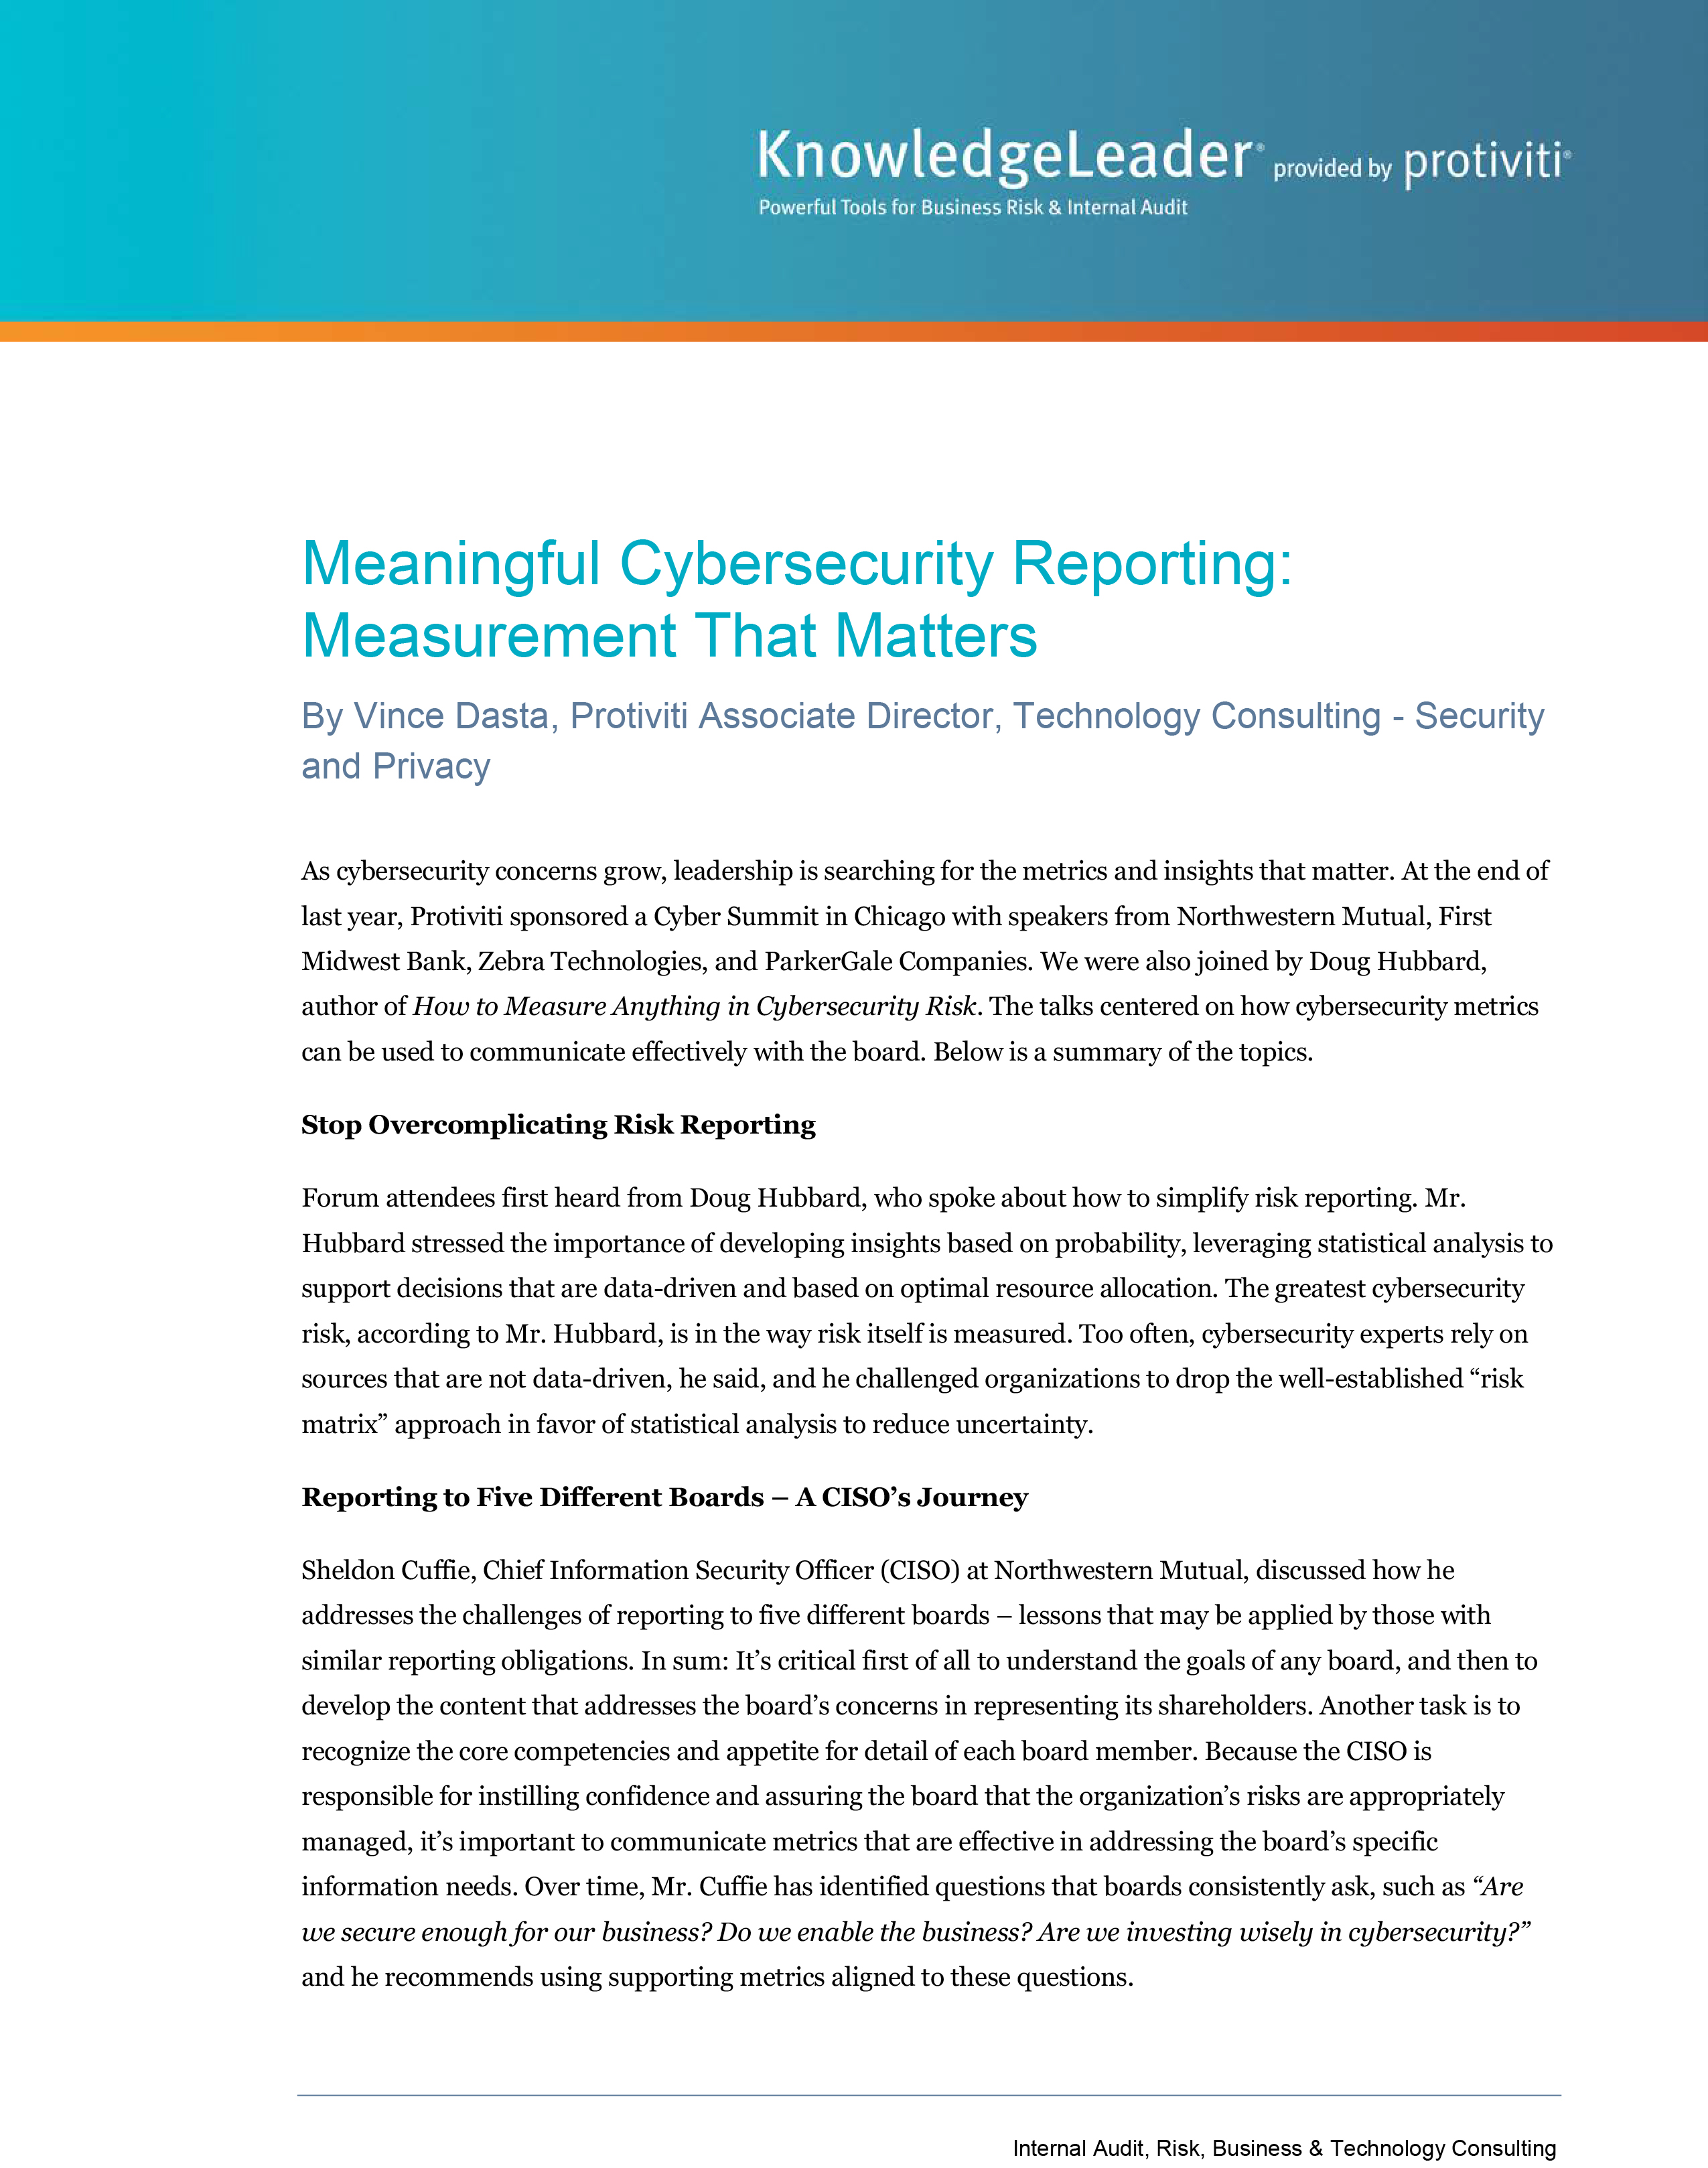 Screenshot of the first page of Meaningful Cybersecurity Reporting - Measurement That Matters